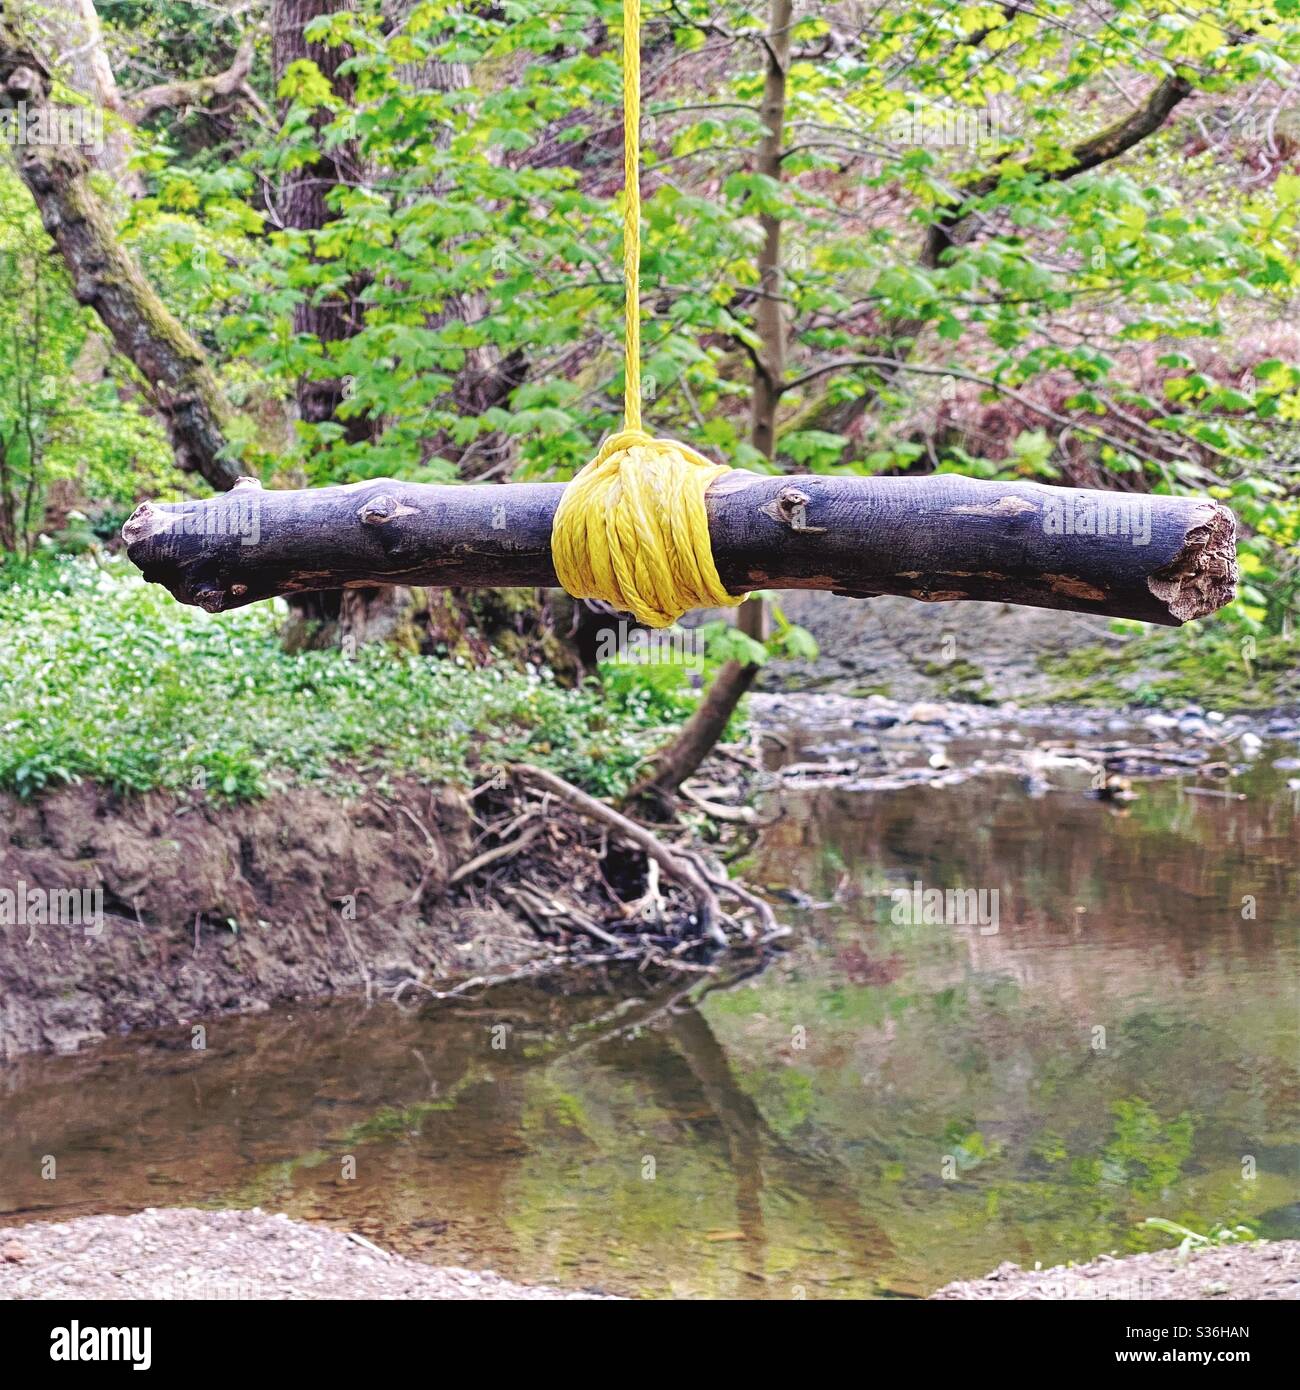 Close up details of a rope swing hanging from the branches of a mature tree  in a forest. A small stick is tied with knot as a handle to swing over river